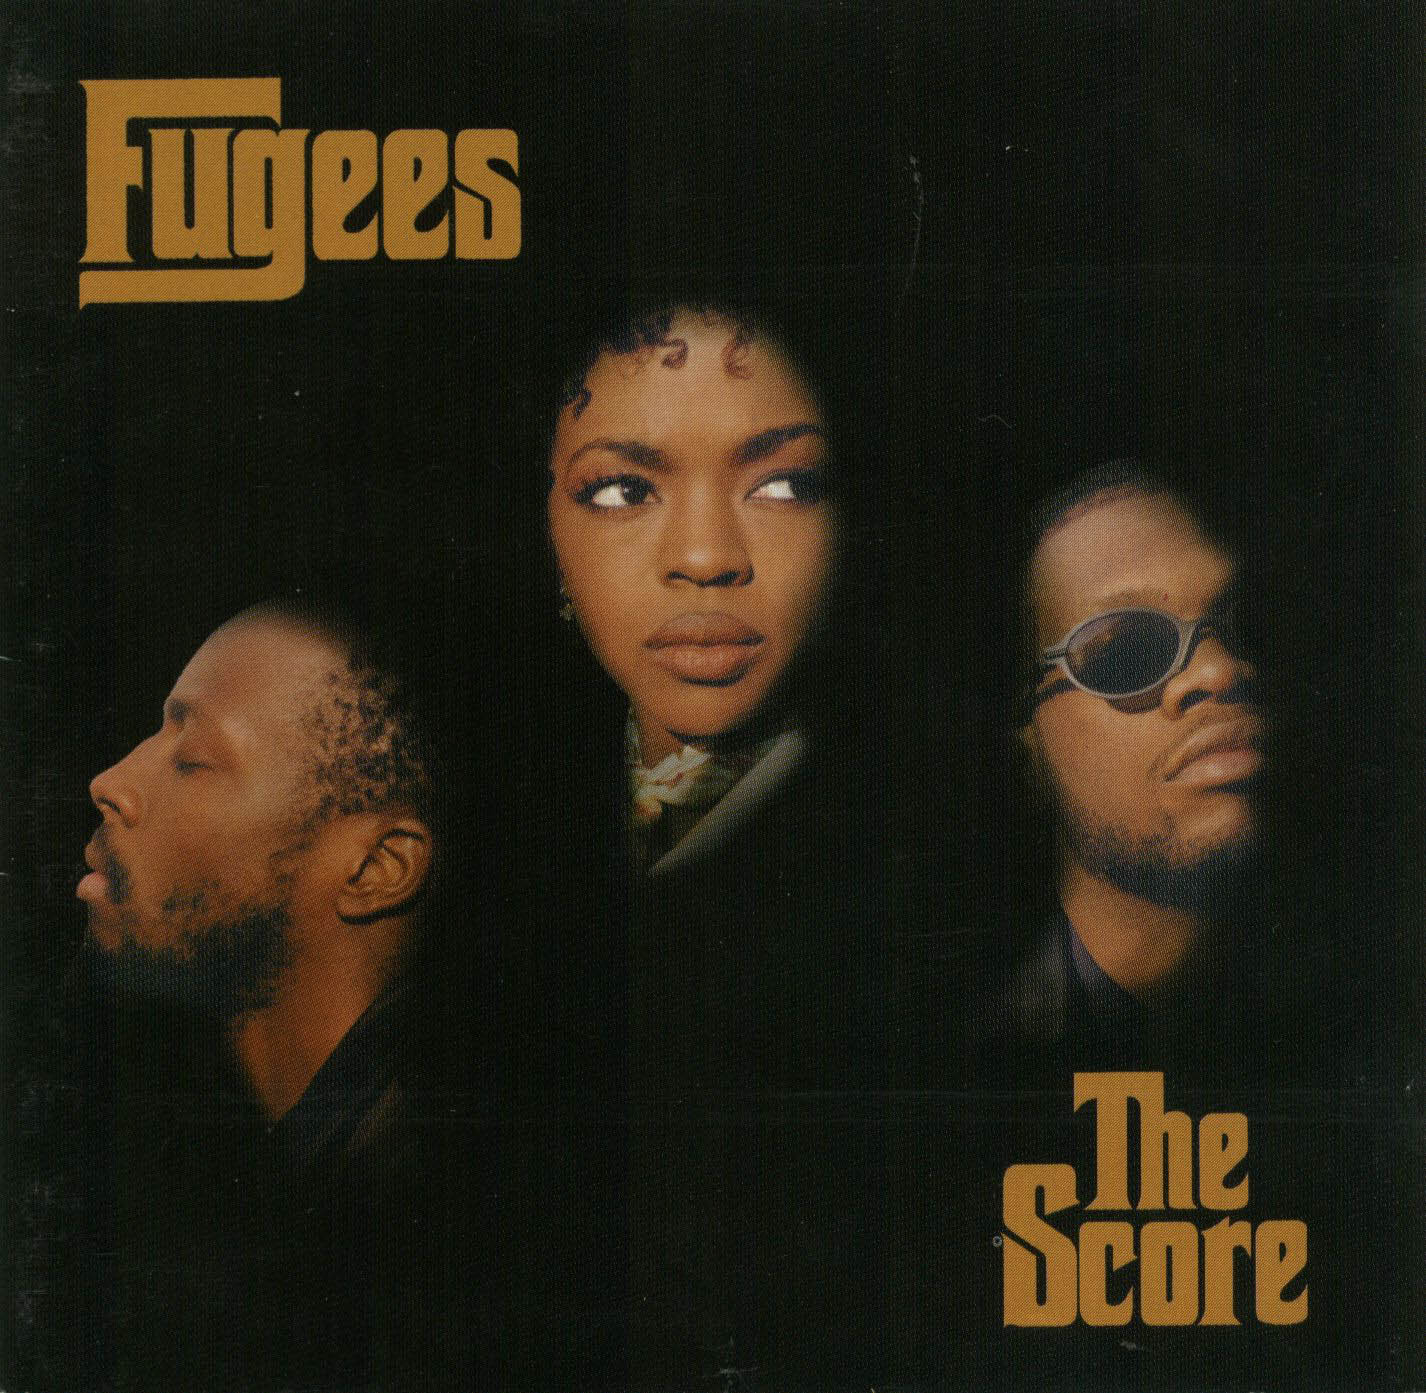 Fugees+The+Score+Frontal.jpg